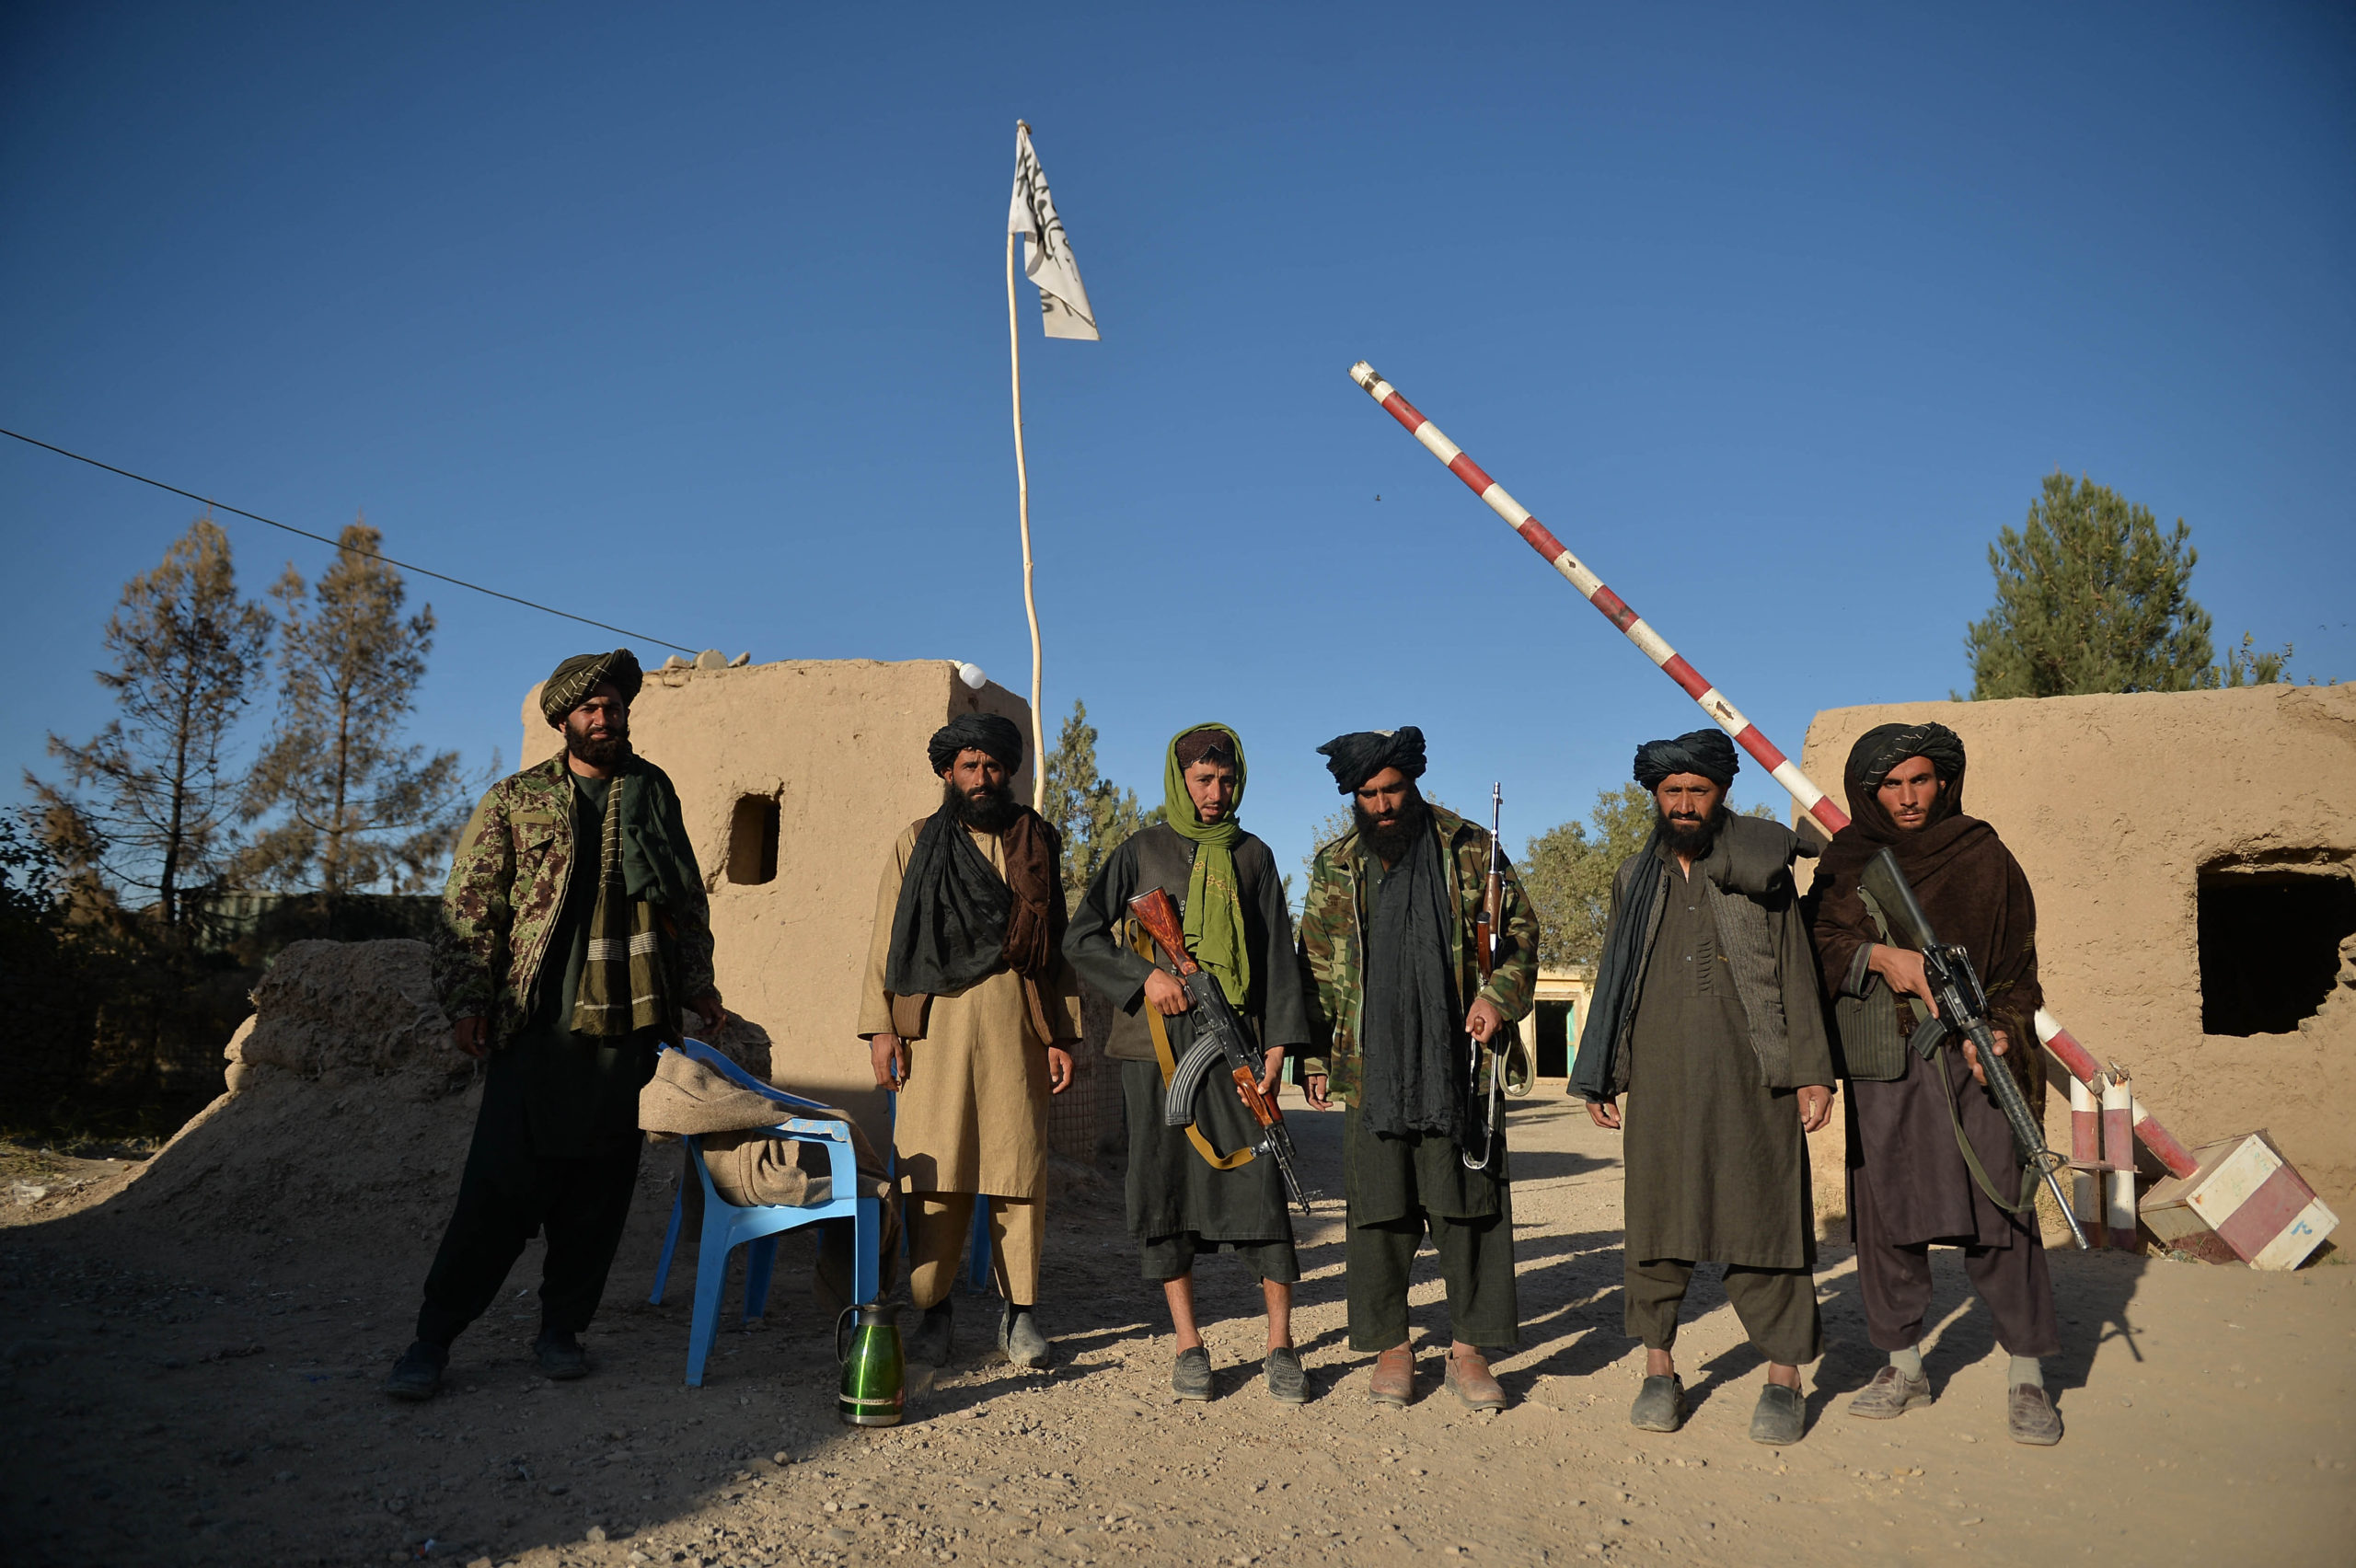 Taliban fighters stand guard at a police station gate in Ghasabha area in Qala-e-Now, Badghis province on October 14, 2021. (Photo by HOSHANG HASHIMI/AFP via Getty Images)